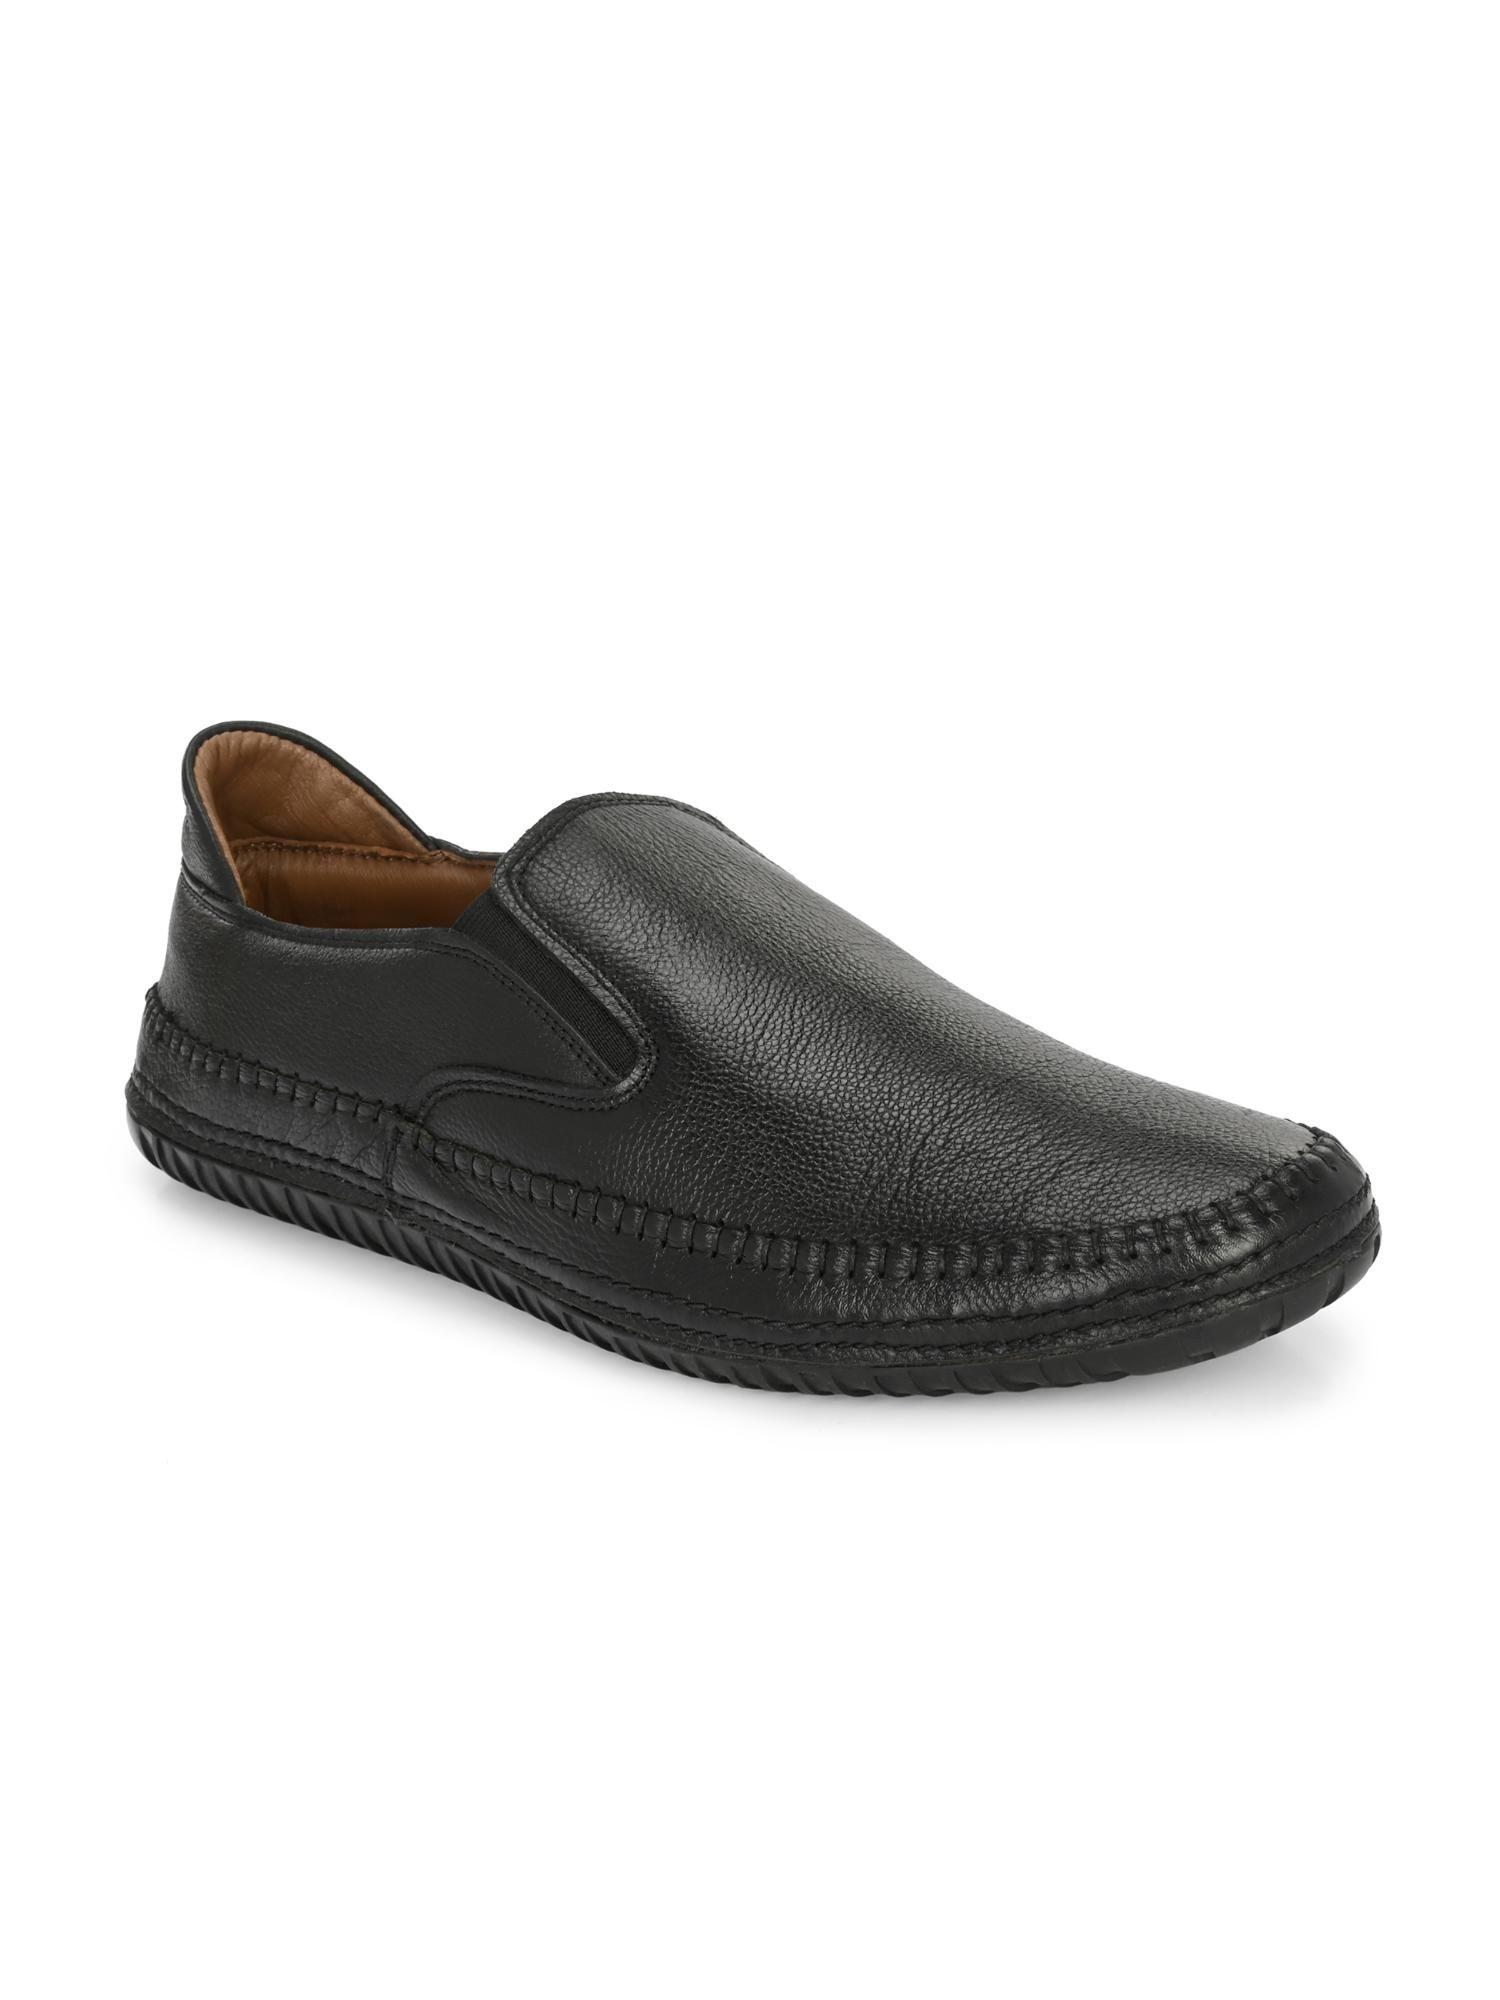 black-genuine-leather-flexible-shoe-with-pu-footbed